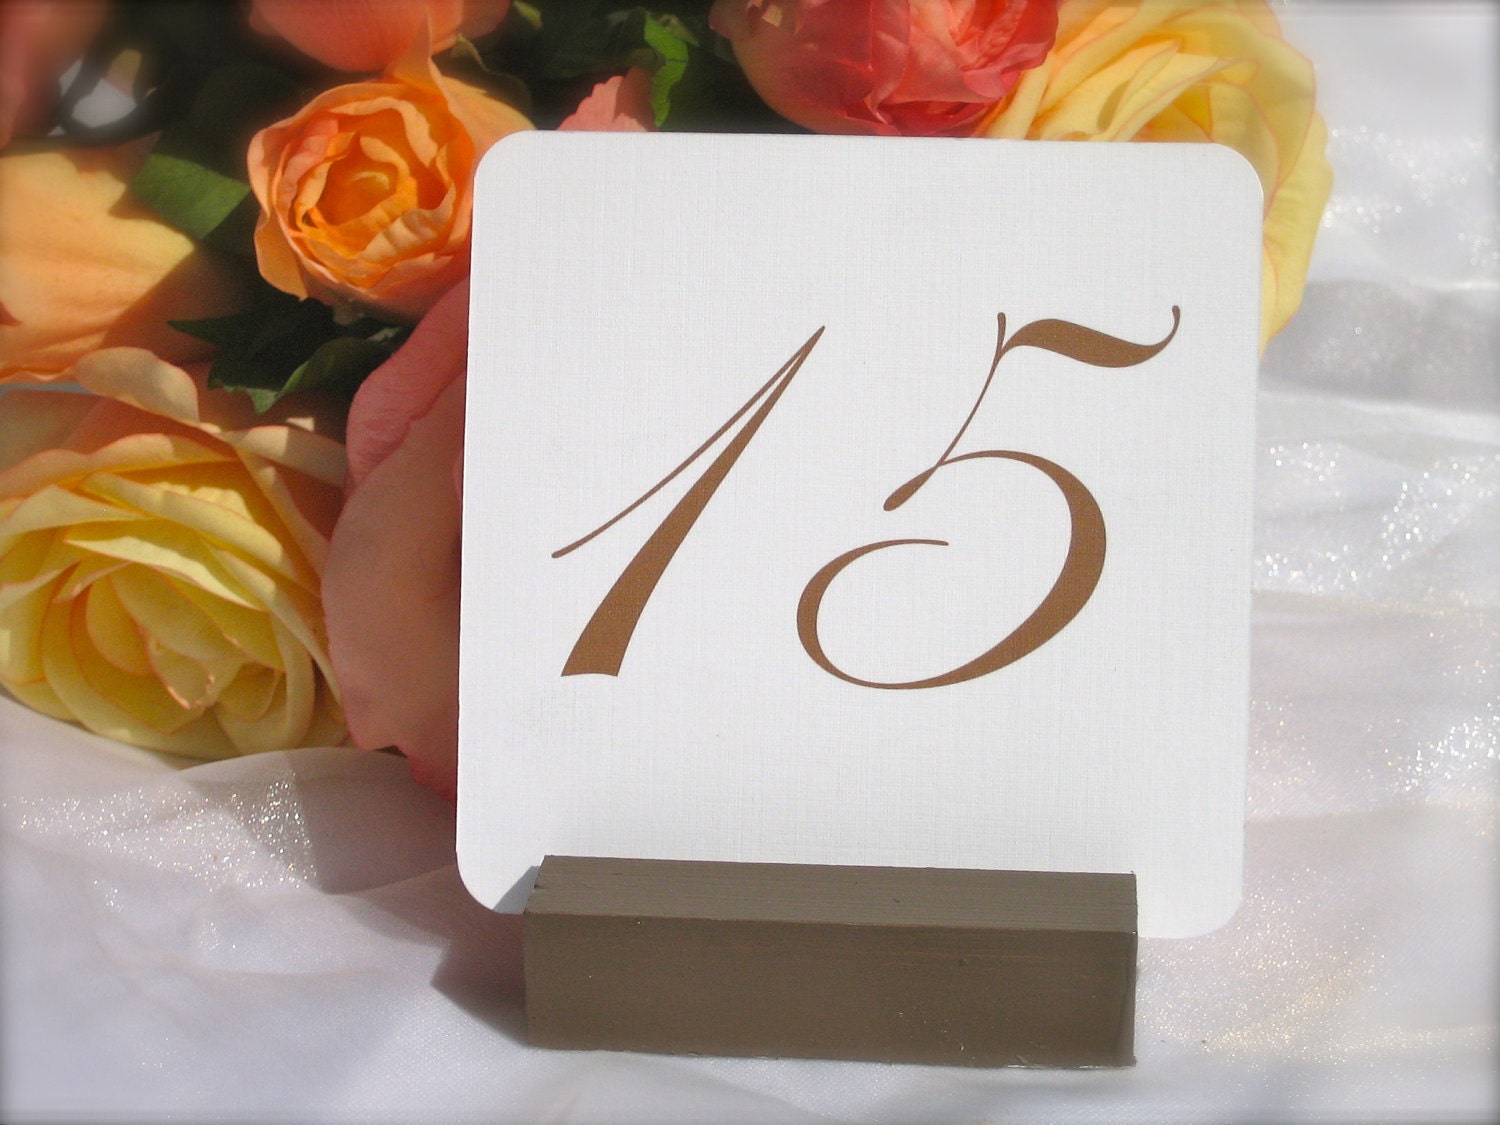 Chocolate Brown Wood Table Number Holders Set of 15 From Gallery360